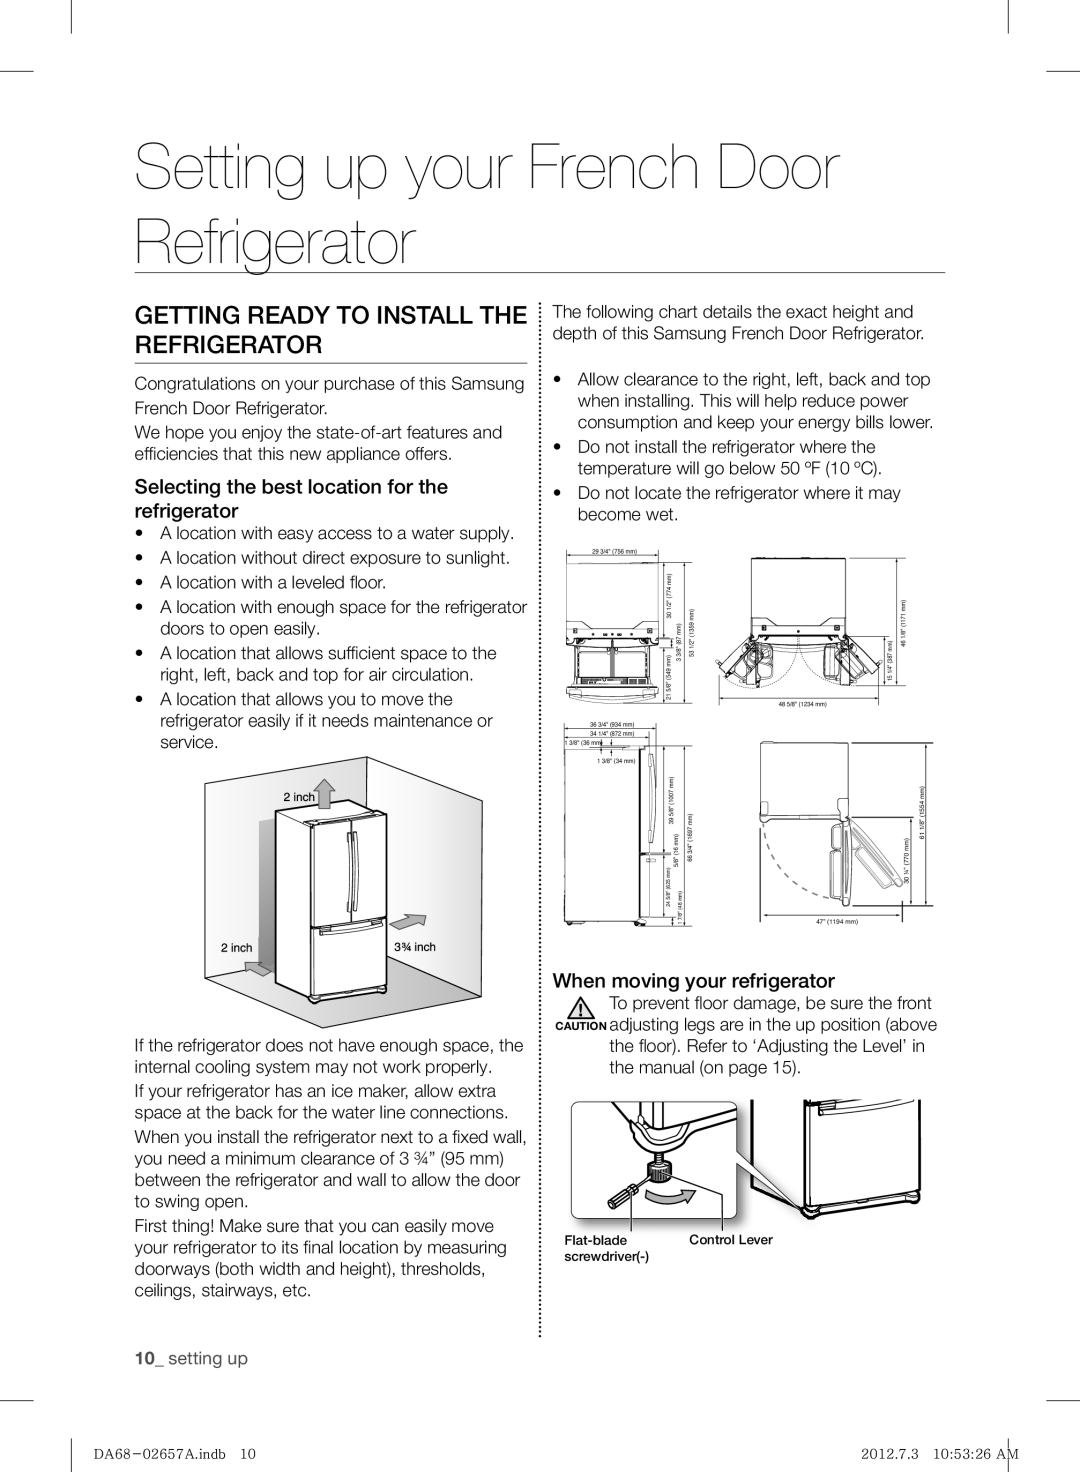 Samsung RF221NCTABC Setting up your French Door Refrigerator, Getting Ready To Install The Refrigerator, setting up 